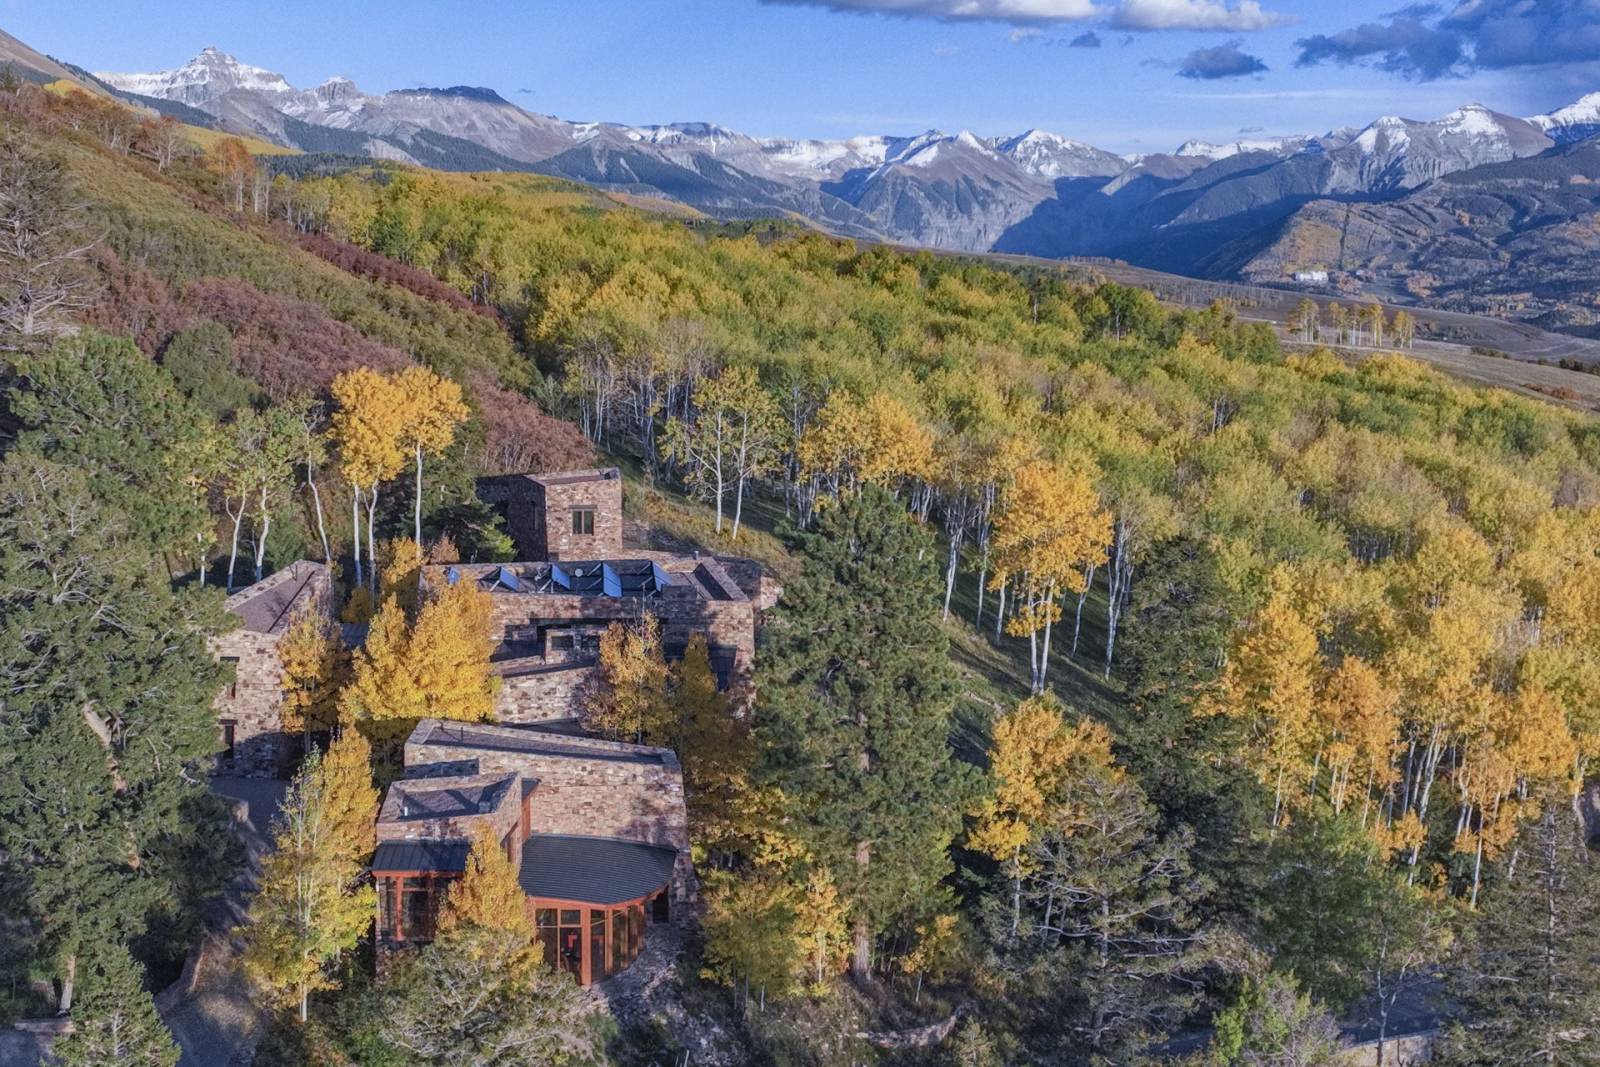 Telluride Vacation Rentals, PaGomo* - Bird eye view of the Property